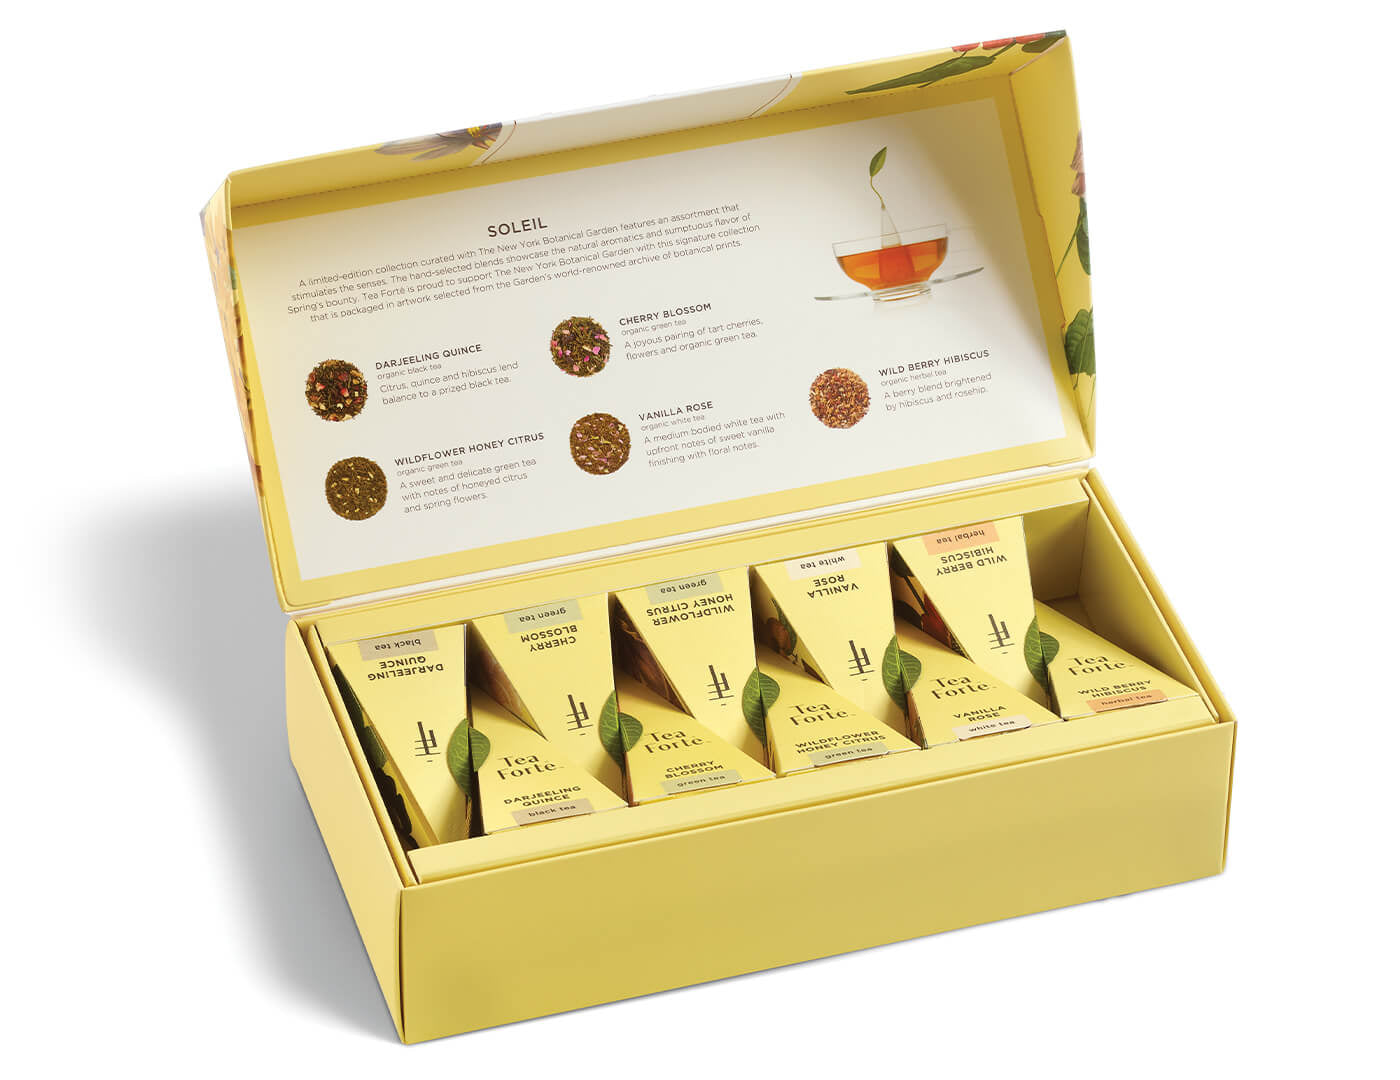 Soleil tea assortment in a 10 count petite presentation box with lid open